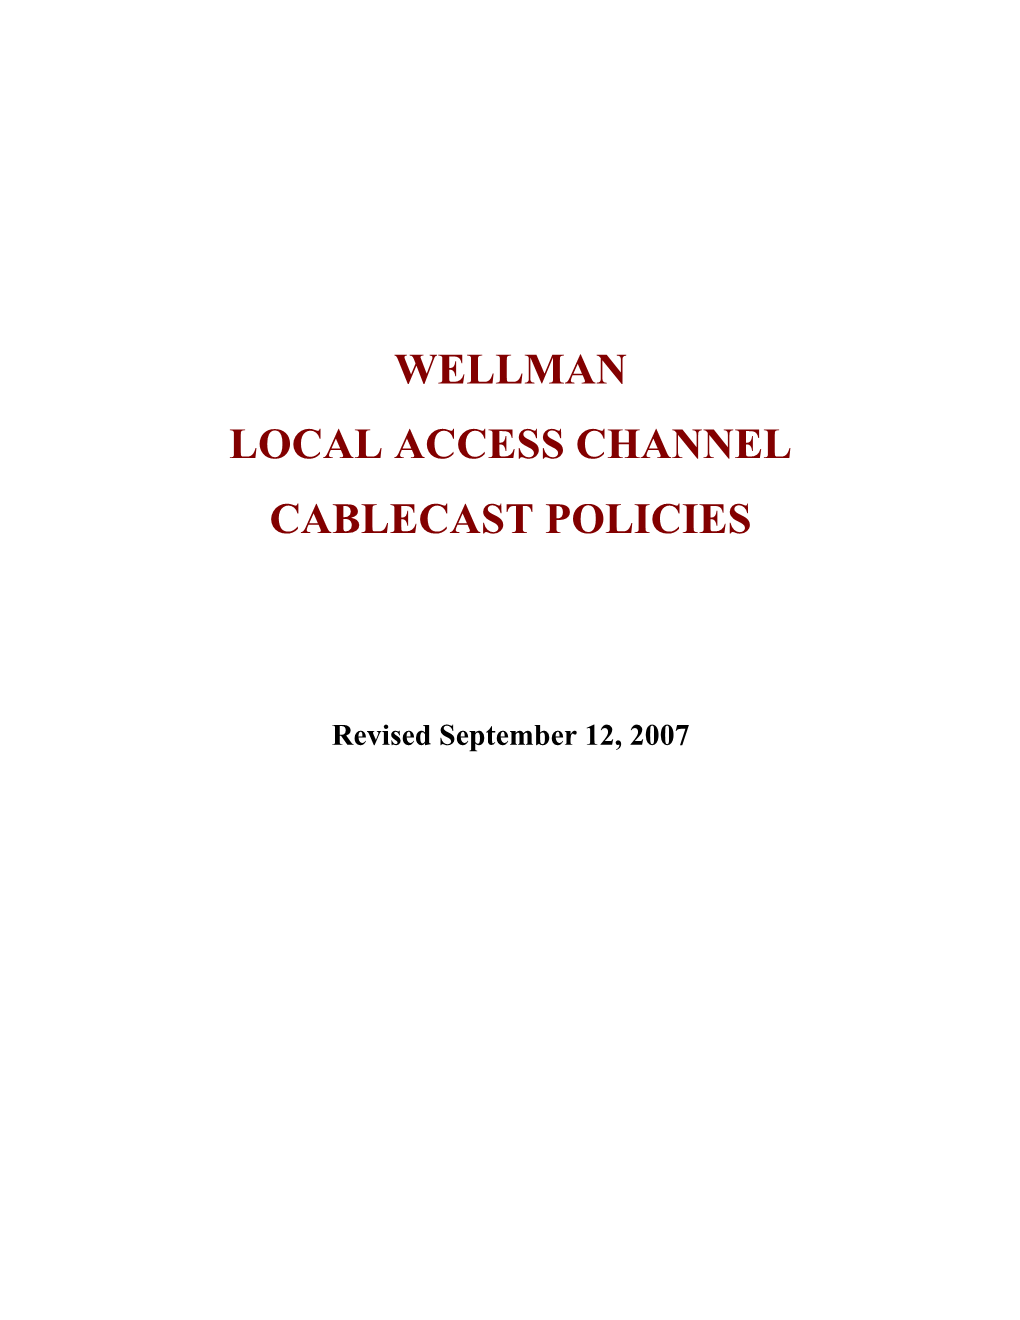 Wellman Local Access Channel Cablecast Policies